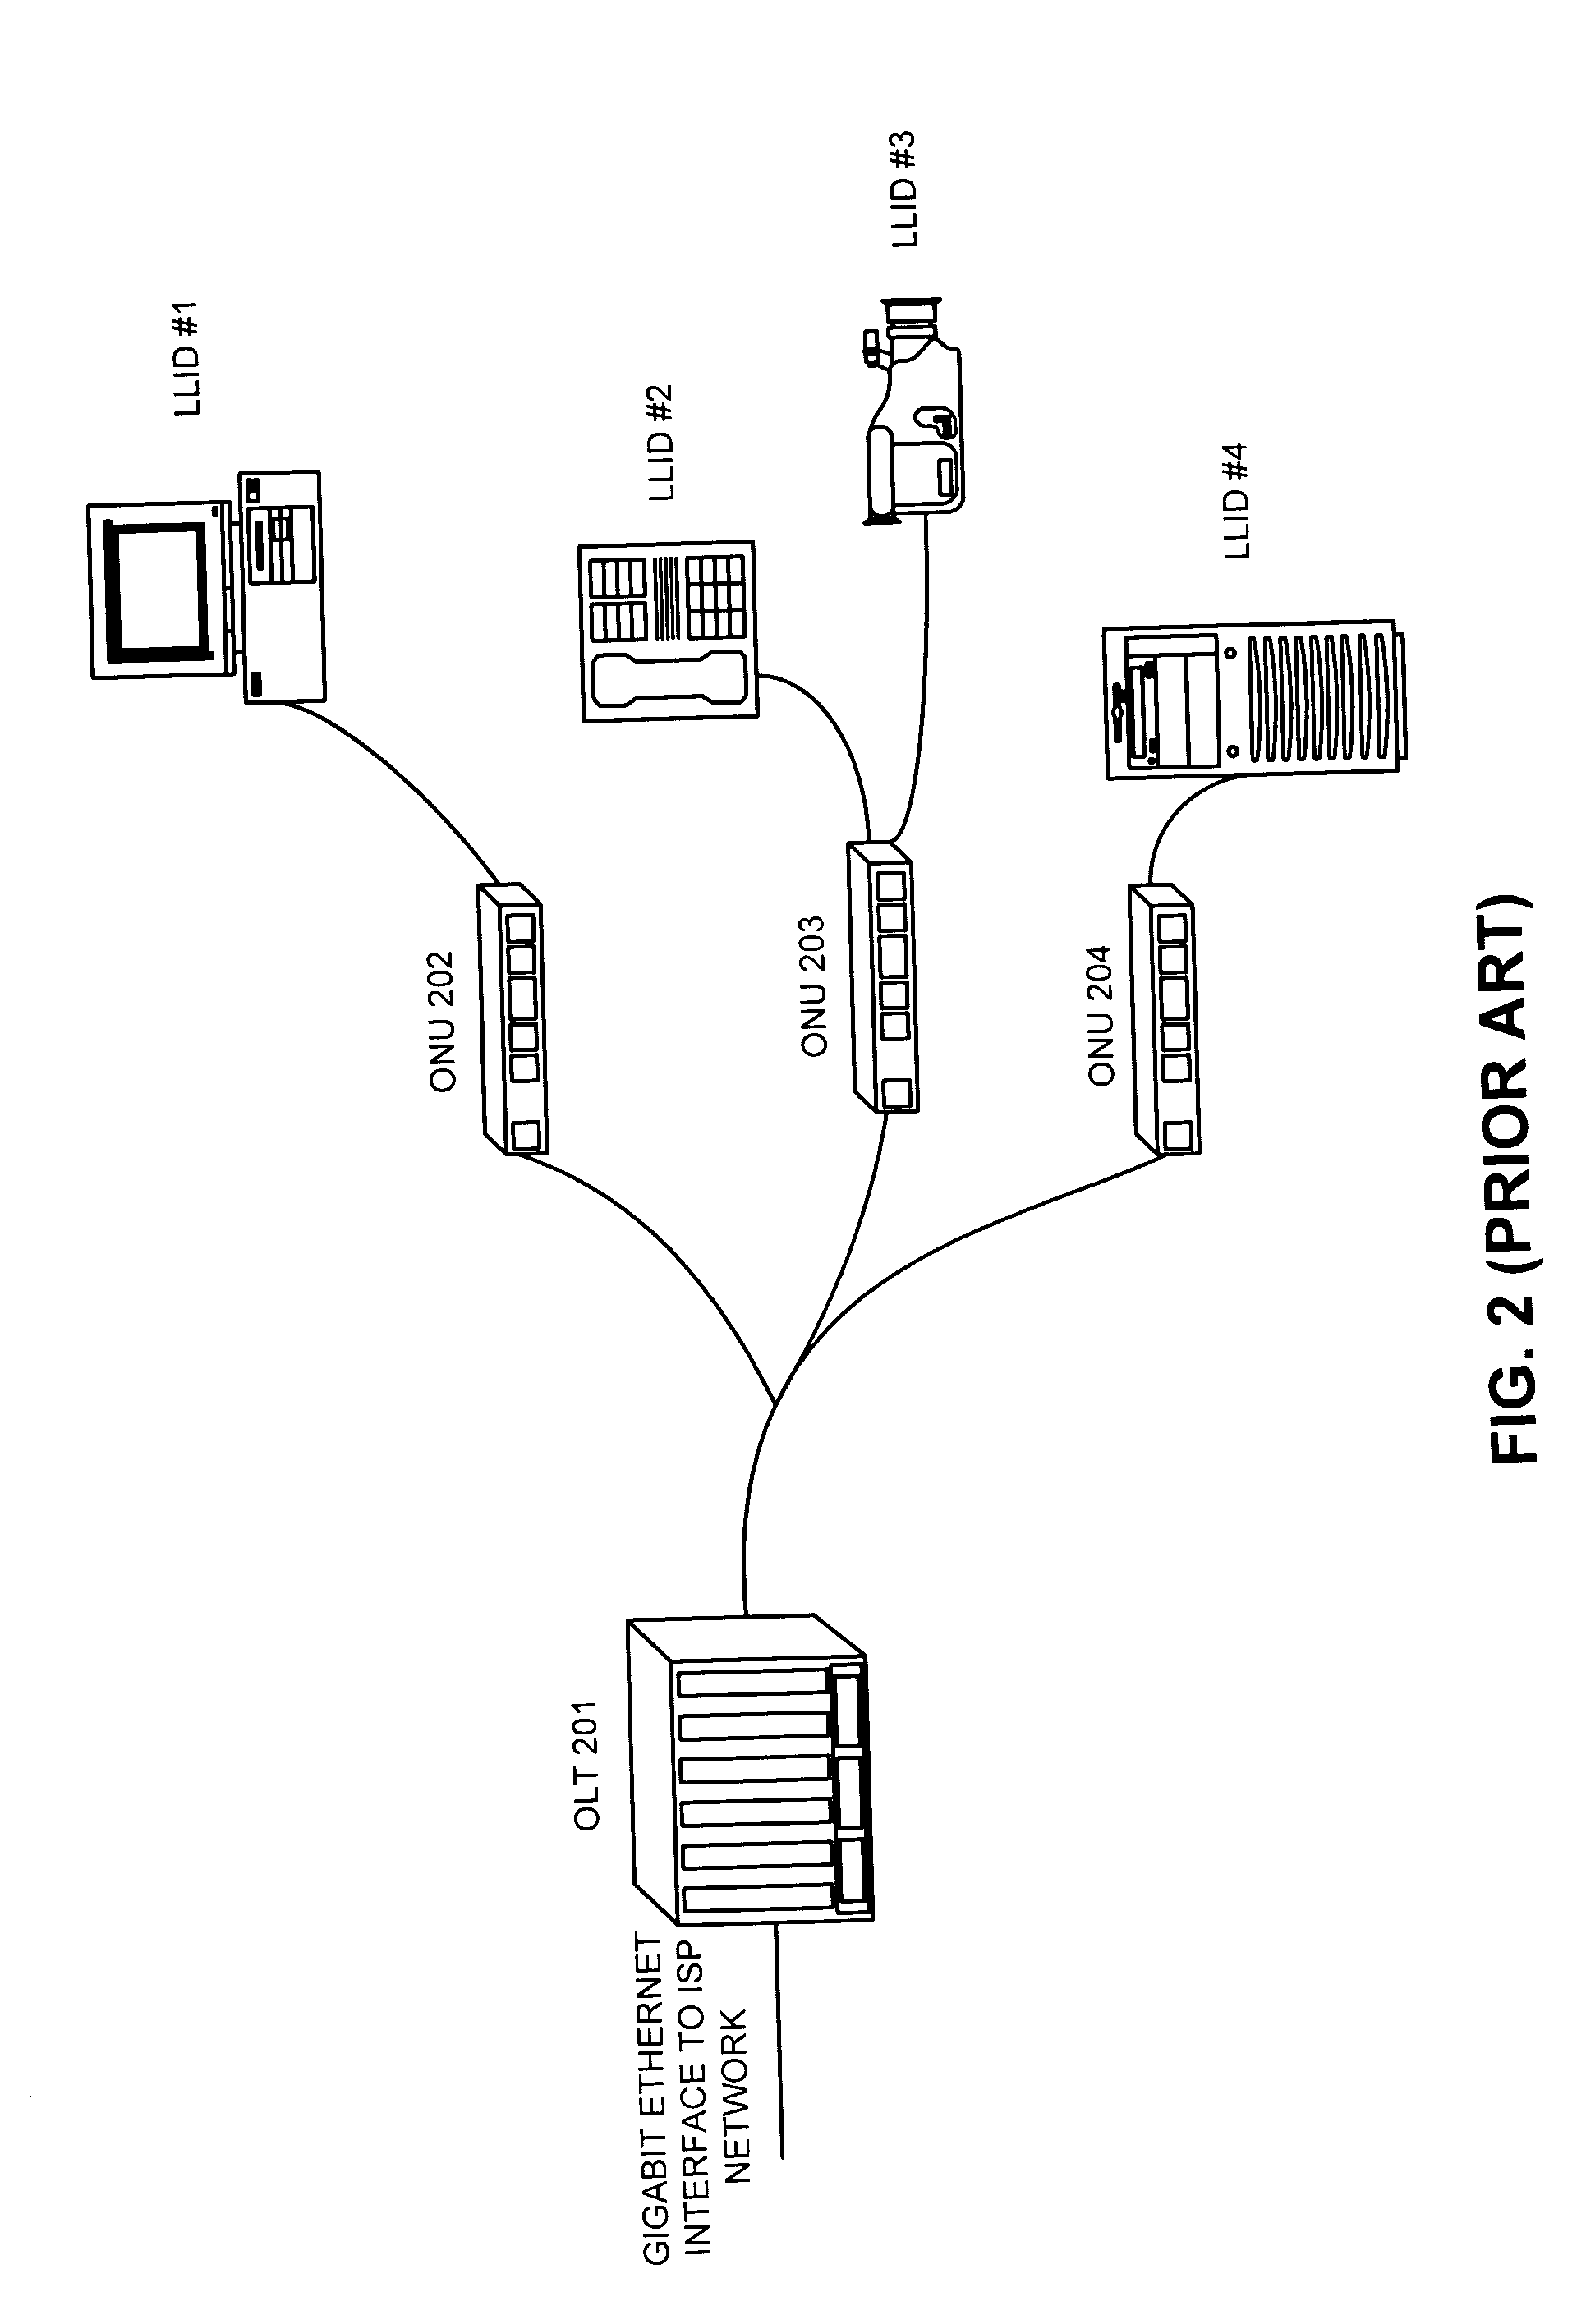 Method and apparatus for dynamically allocating upstream bandwidth in passive optical networks